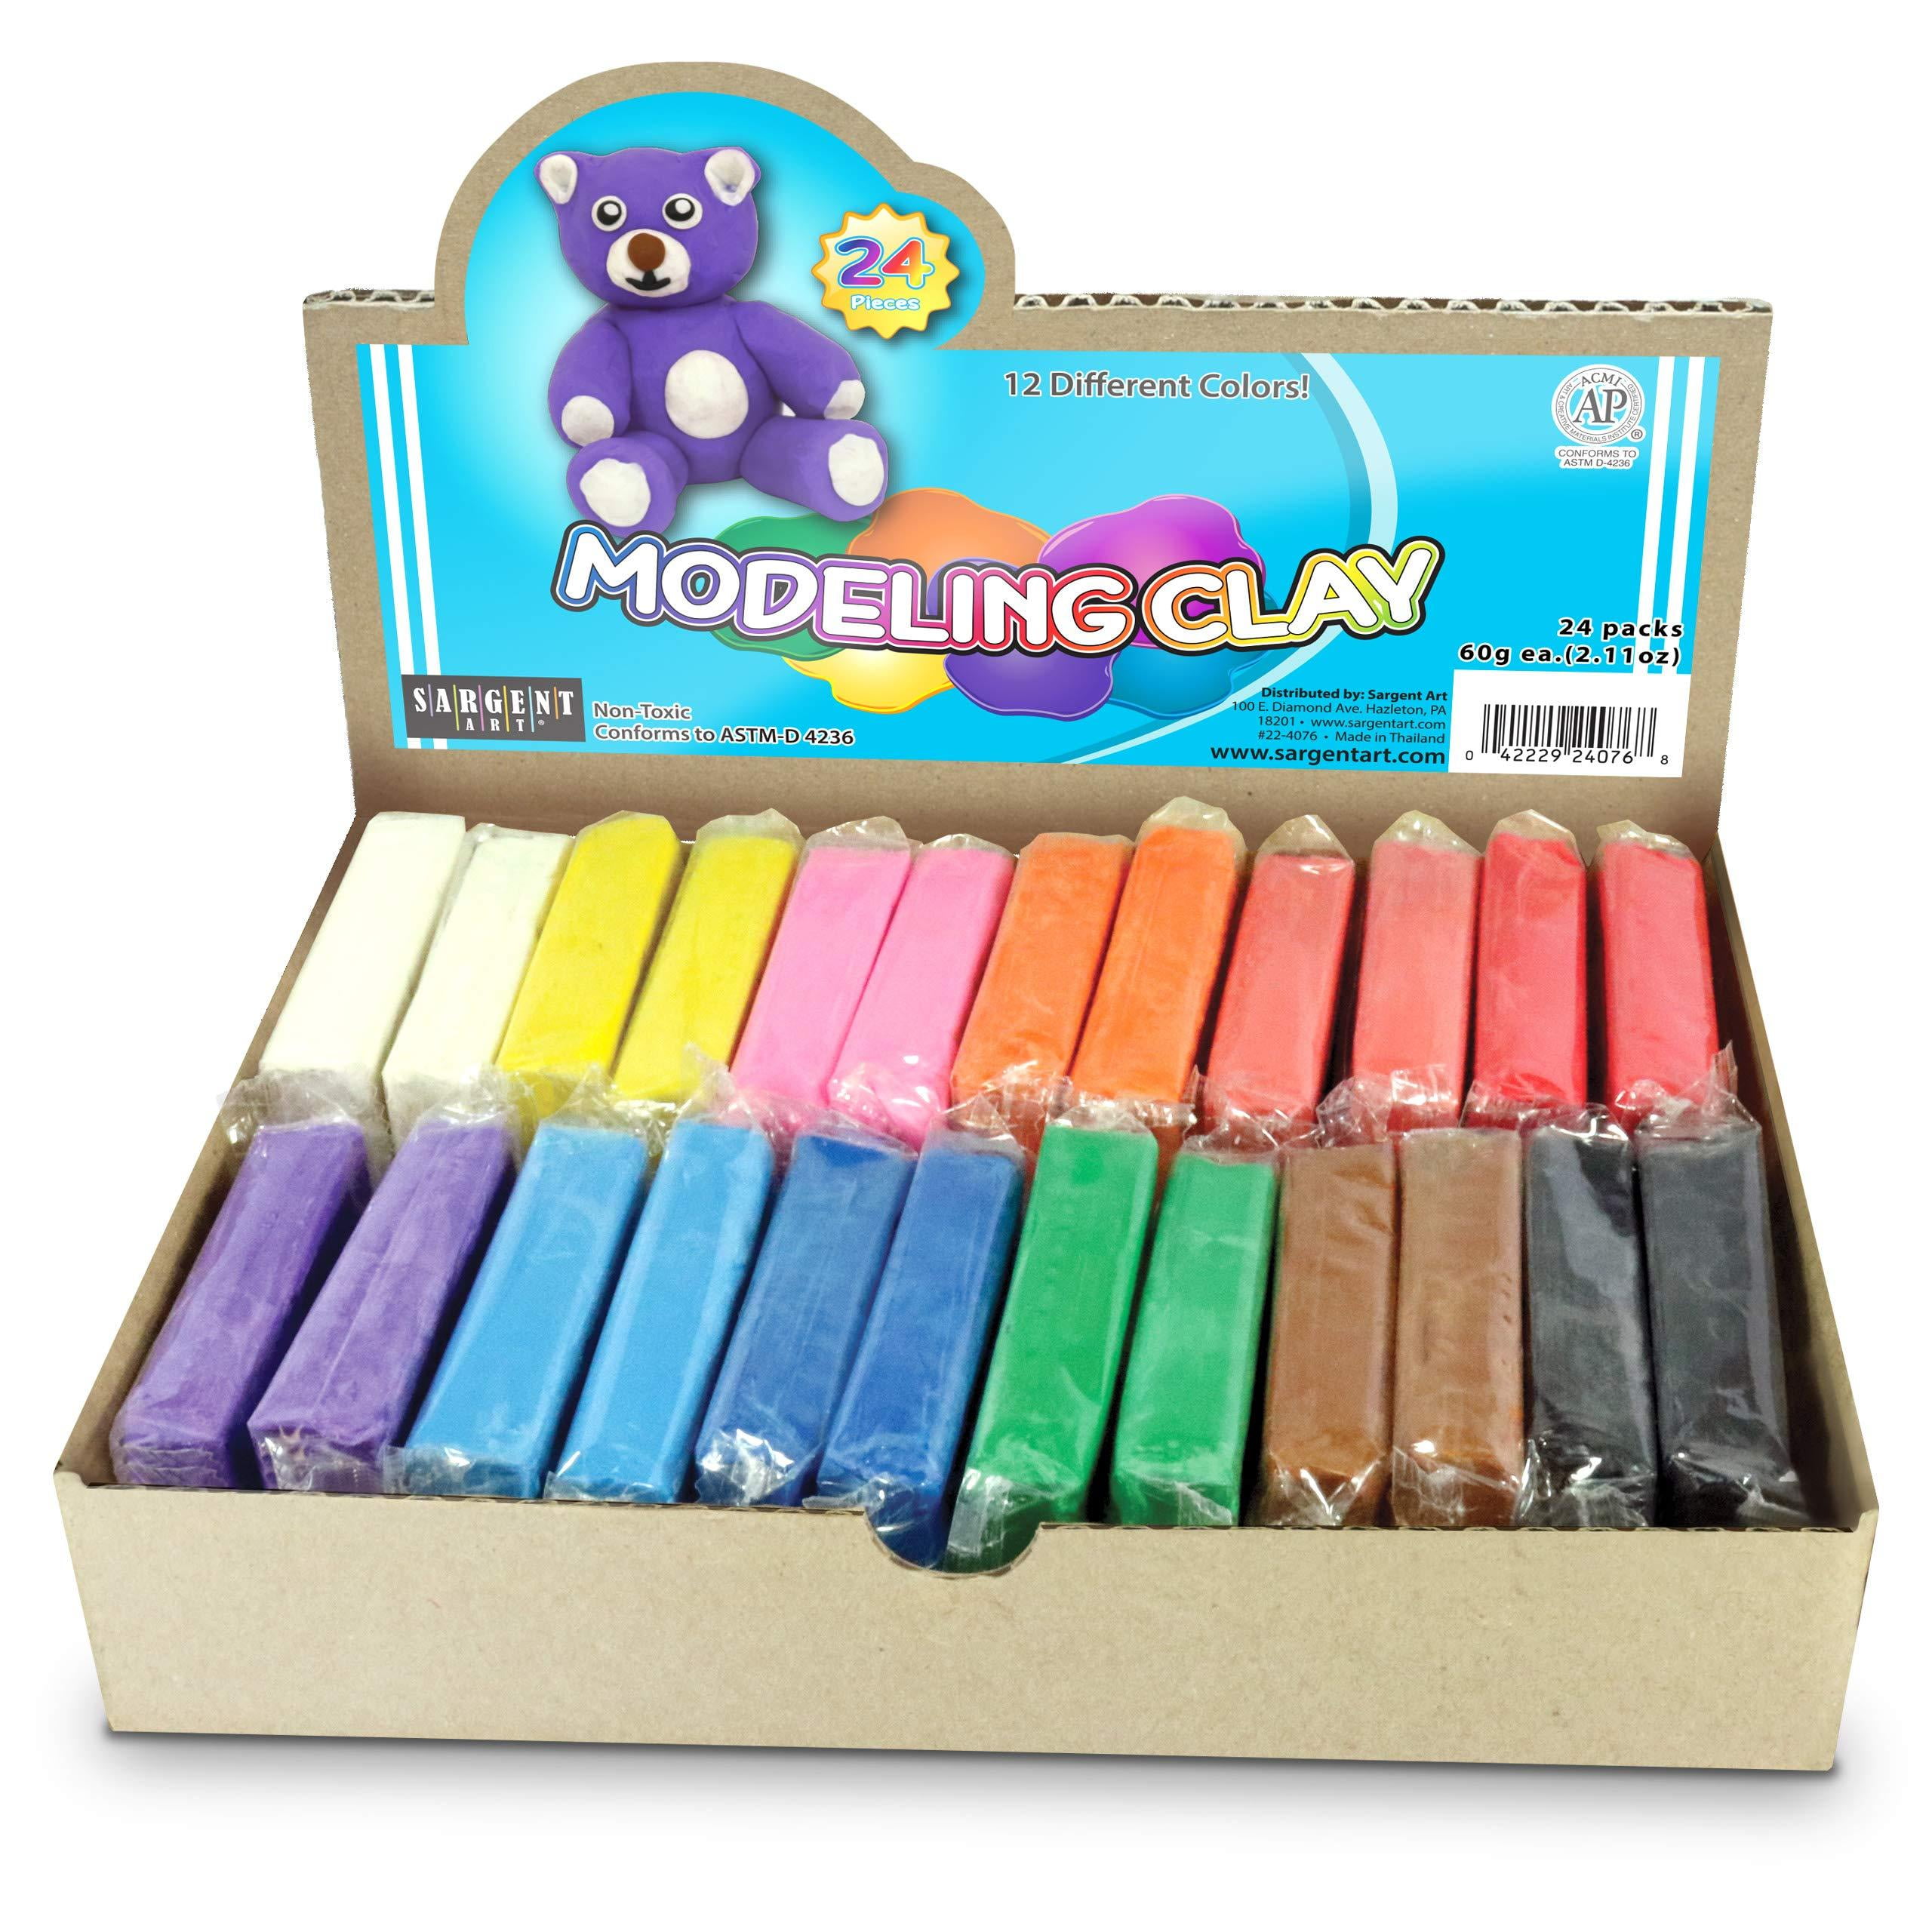 MODELING CLAY 12 STICKS MULTI COLORED 3" LONG STICKS IN 12 COLORS 